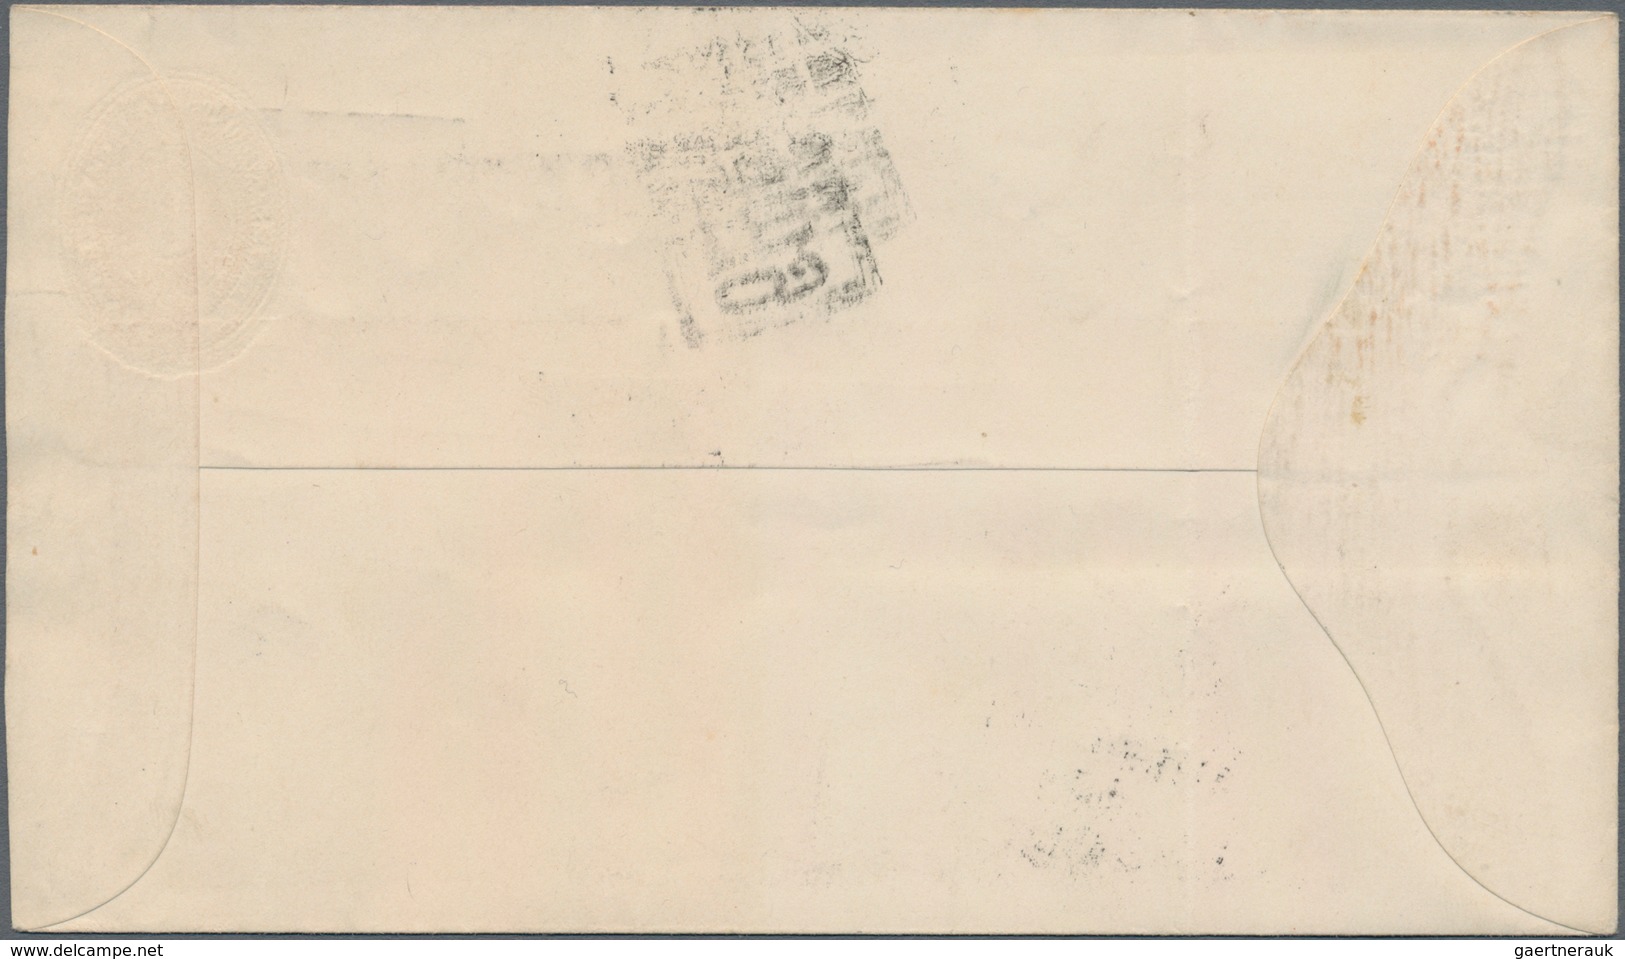 Mexiko - Ganzsachen: 1893, Commercially Used Uprated Postal Stationery Envelope 6 Centavos Carmine F - Mexico